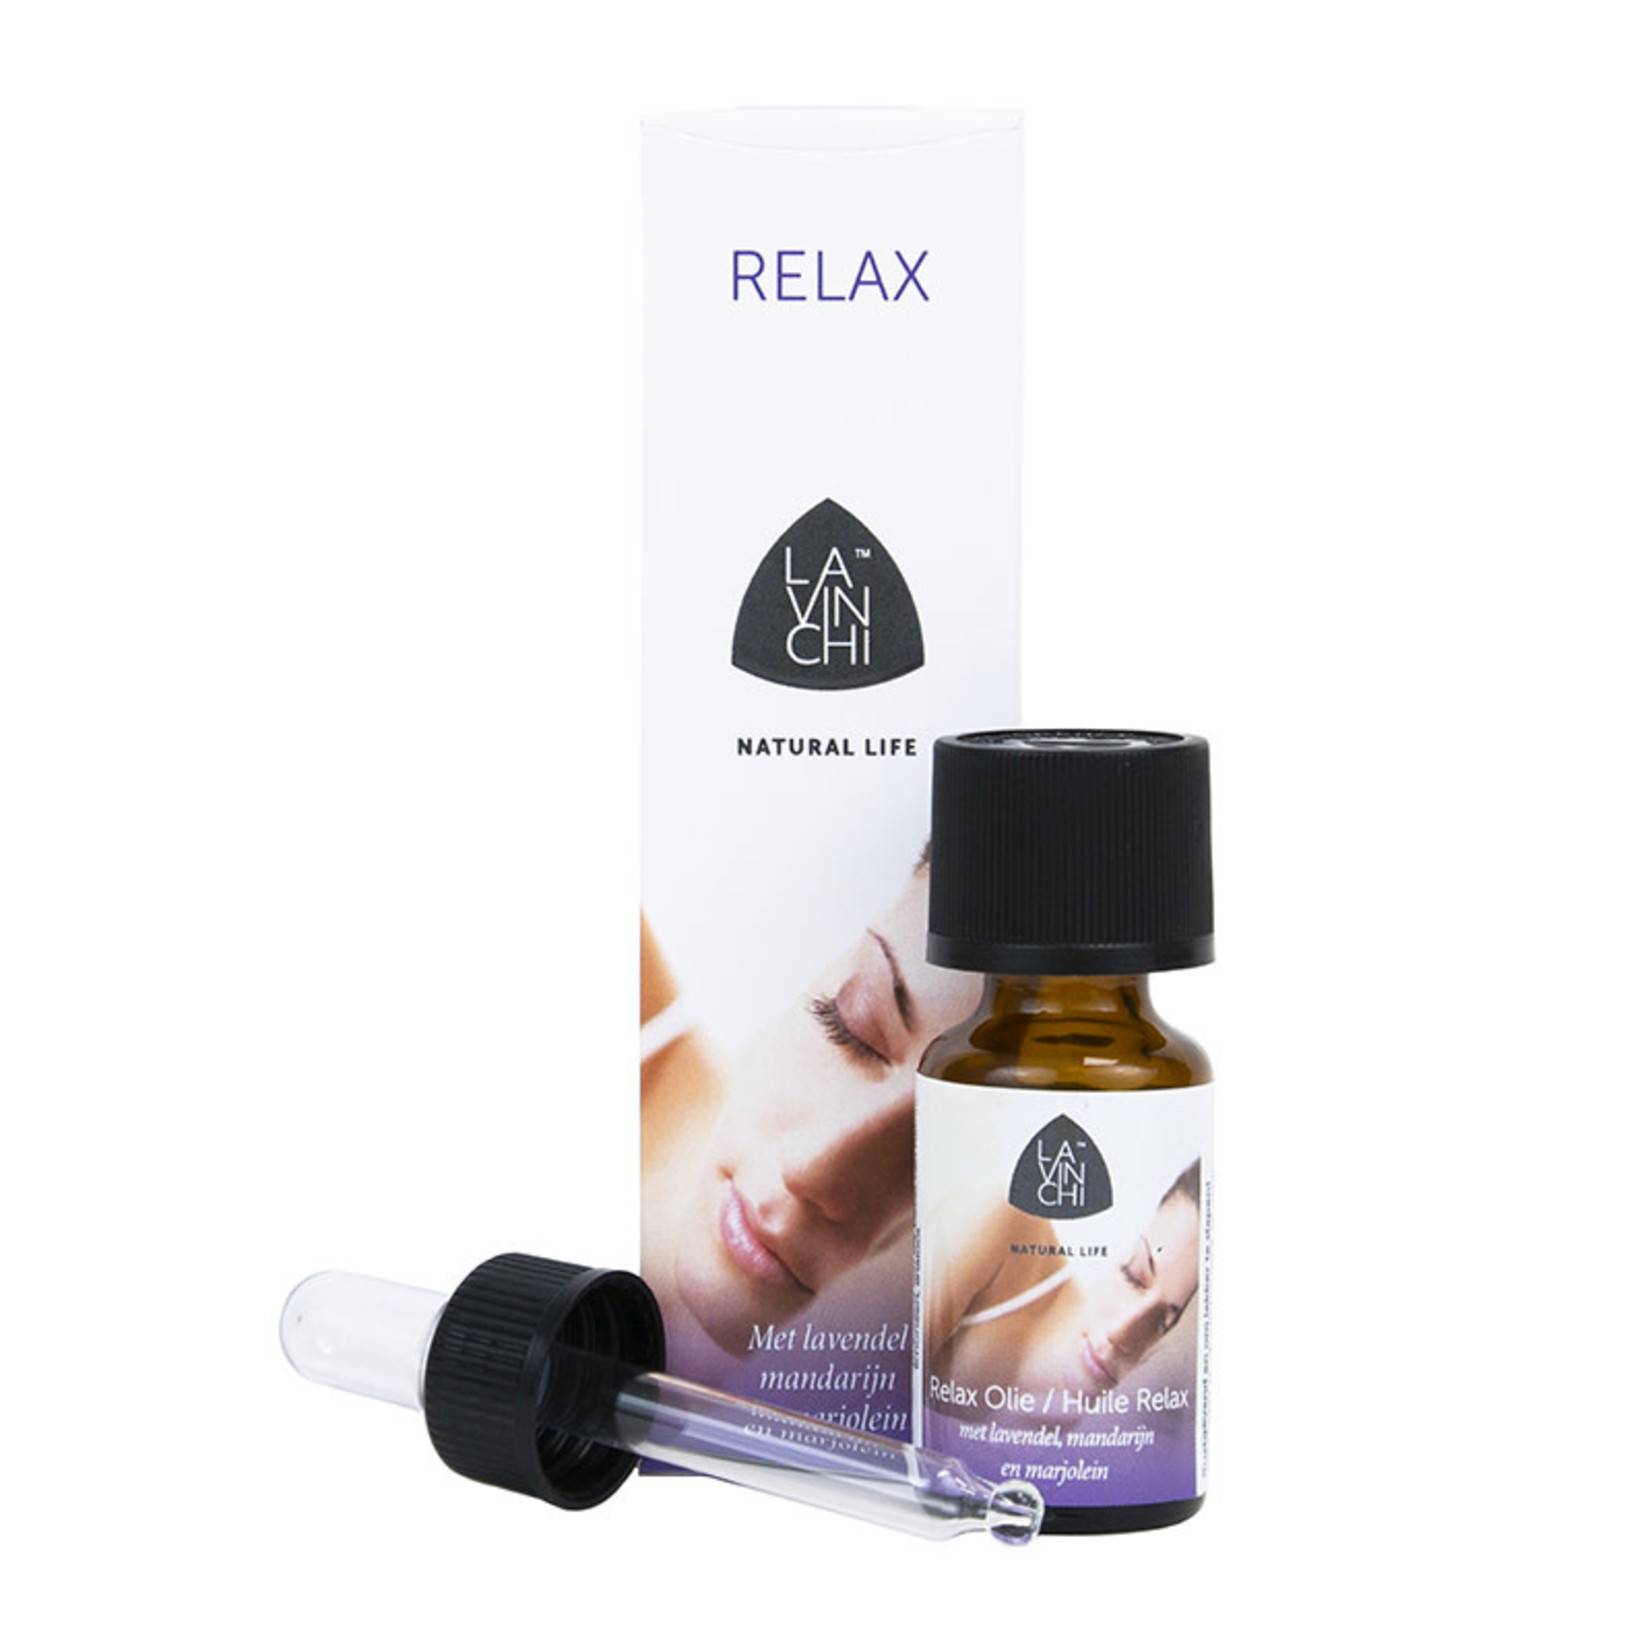 Chi Natural Life Lavinchi Relax mix olie - 10 ml